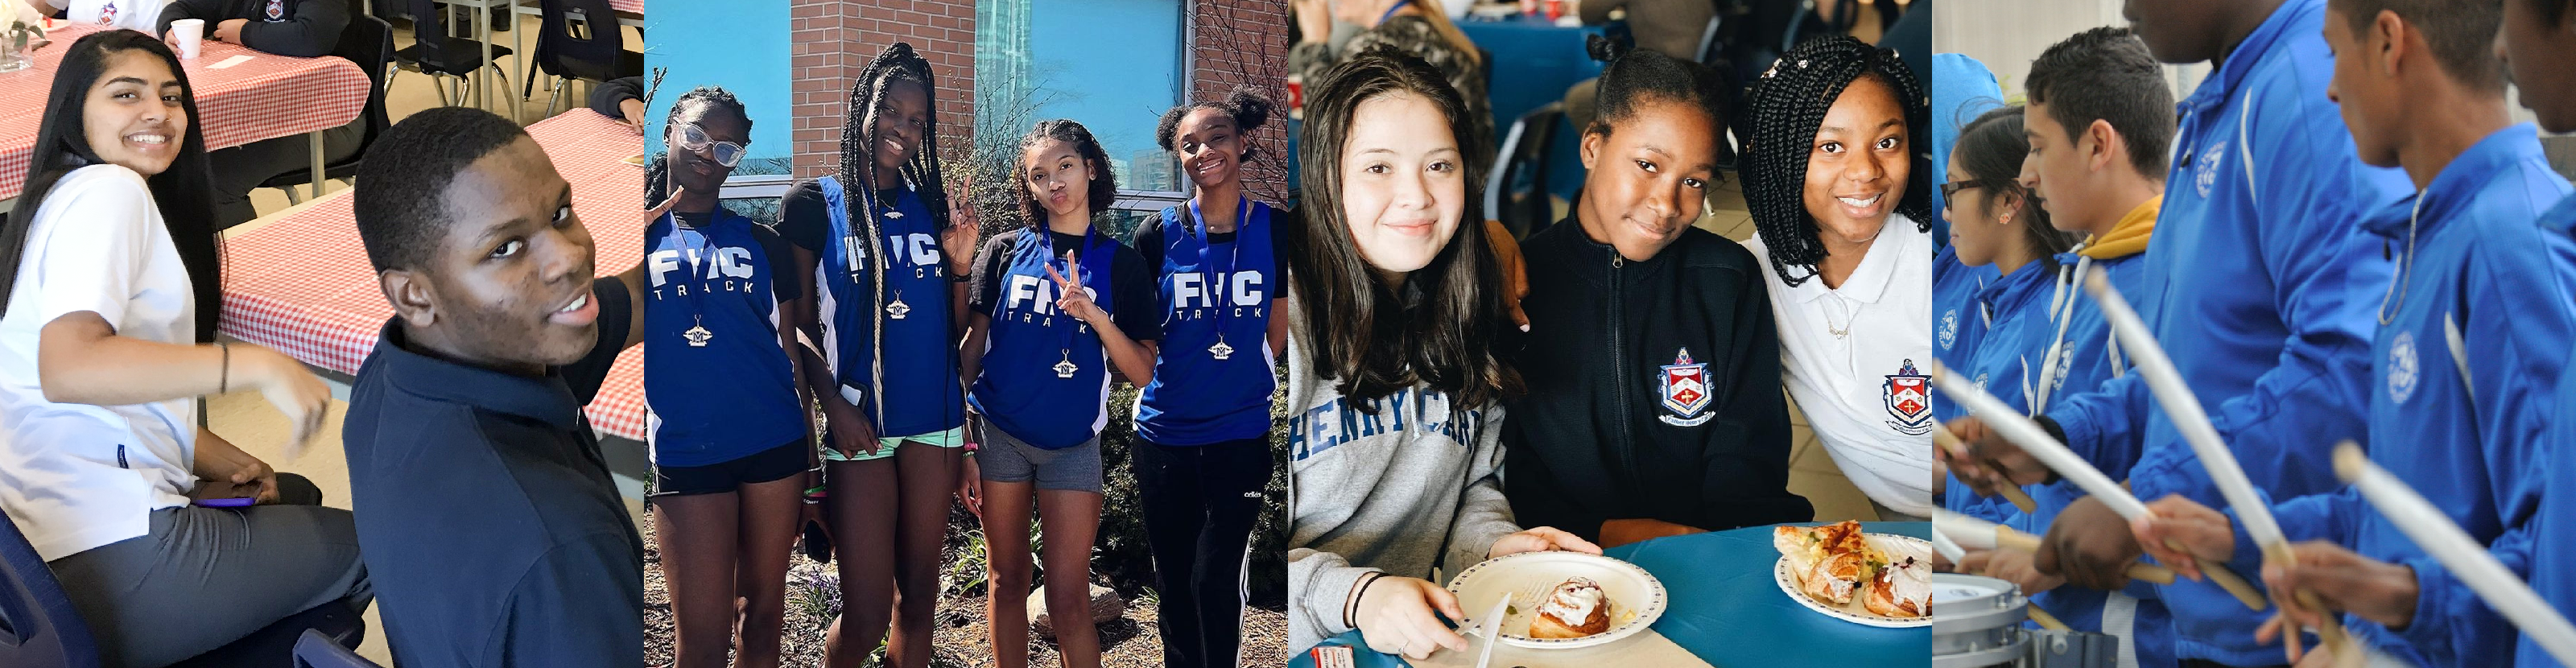 A banner made of four photos. The first photo is of two students in school uniform in class. The second photo is of four students in track and field jerseys wearing their winning medals. The third photo is of three students in school uniform sitting around a table eating food. The fourth photo is of the Father Henry Carr drumline performing on the field.